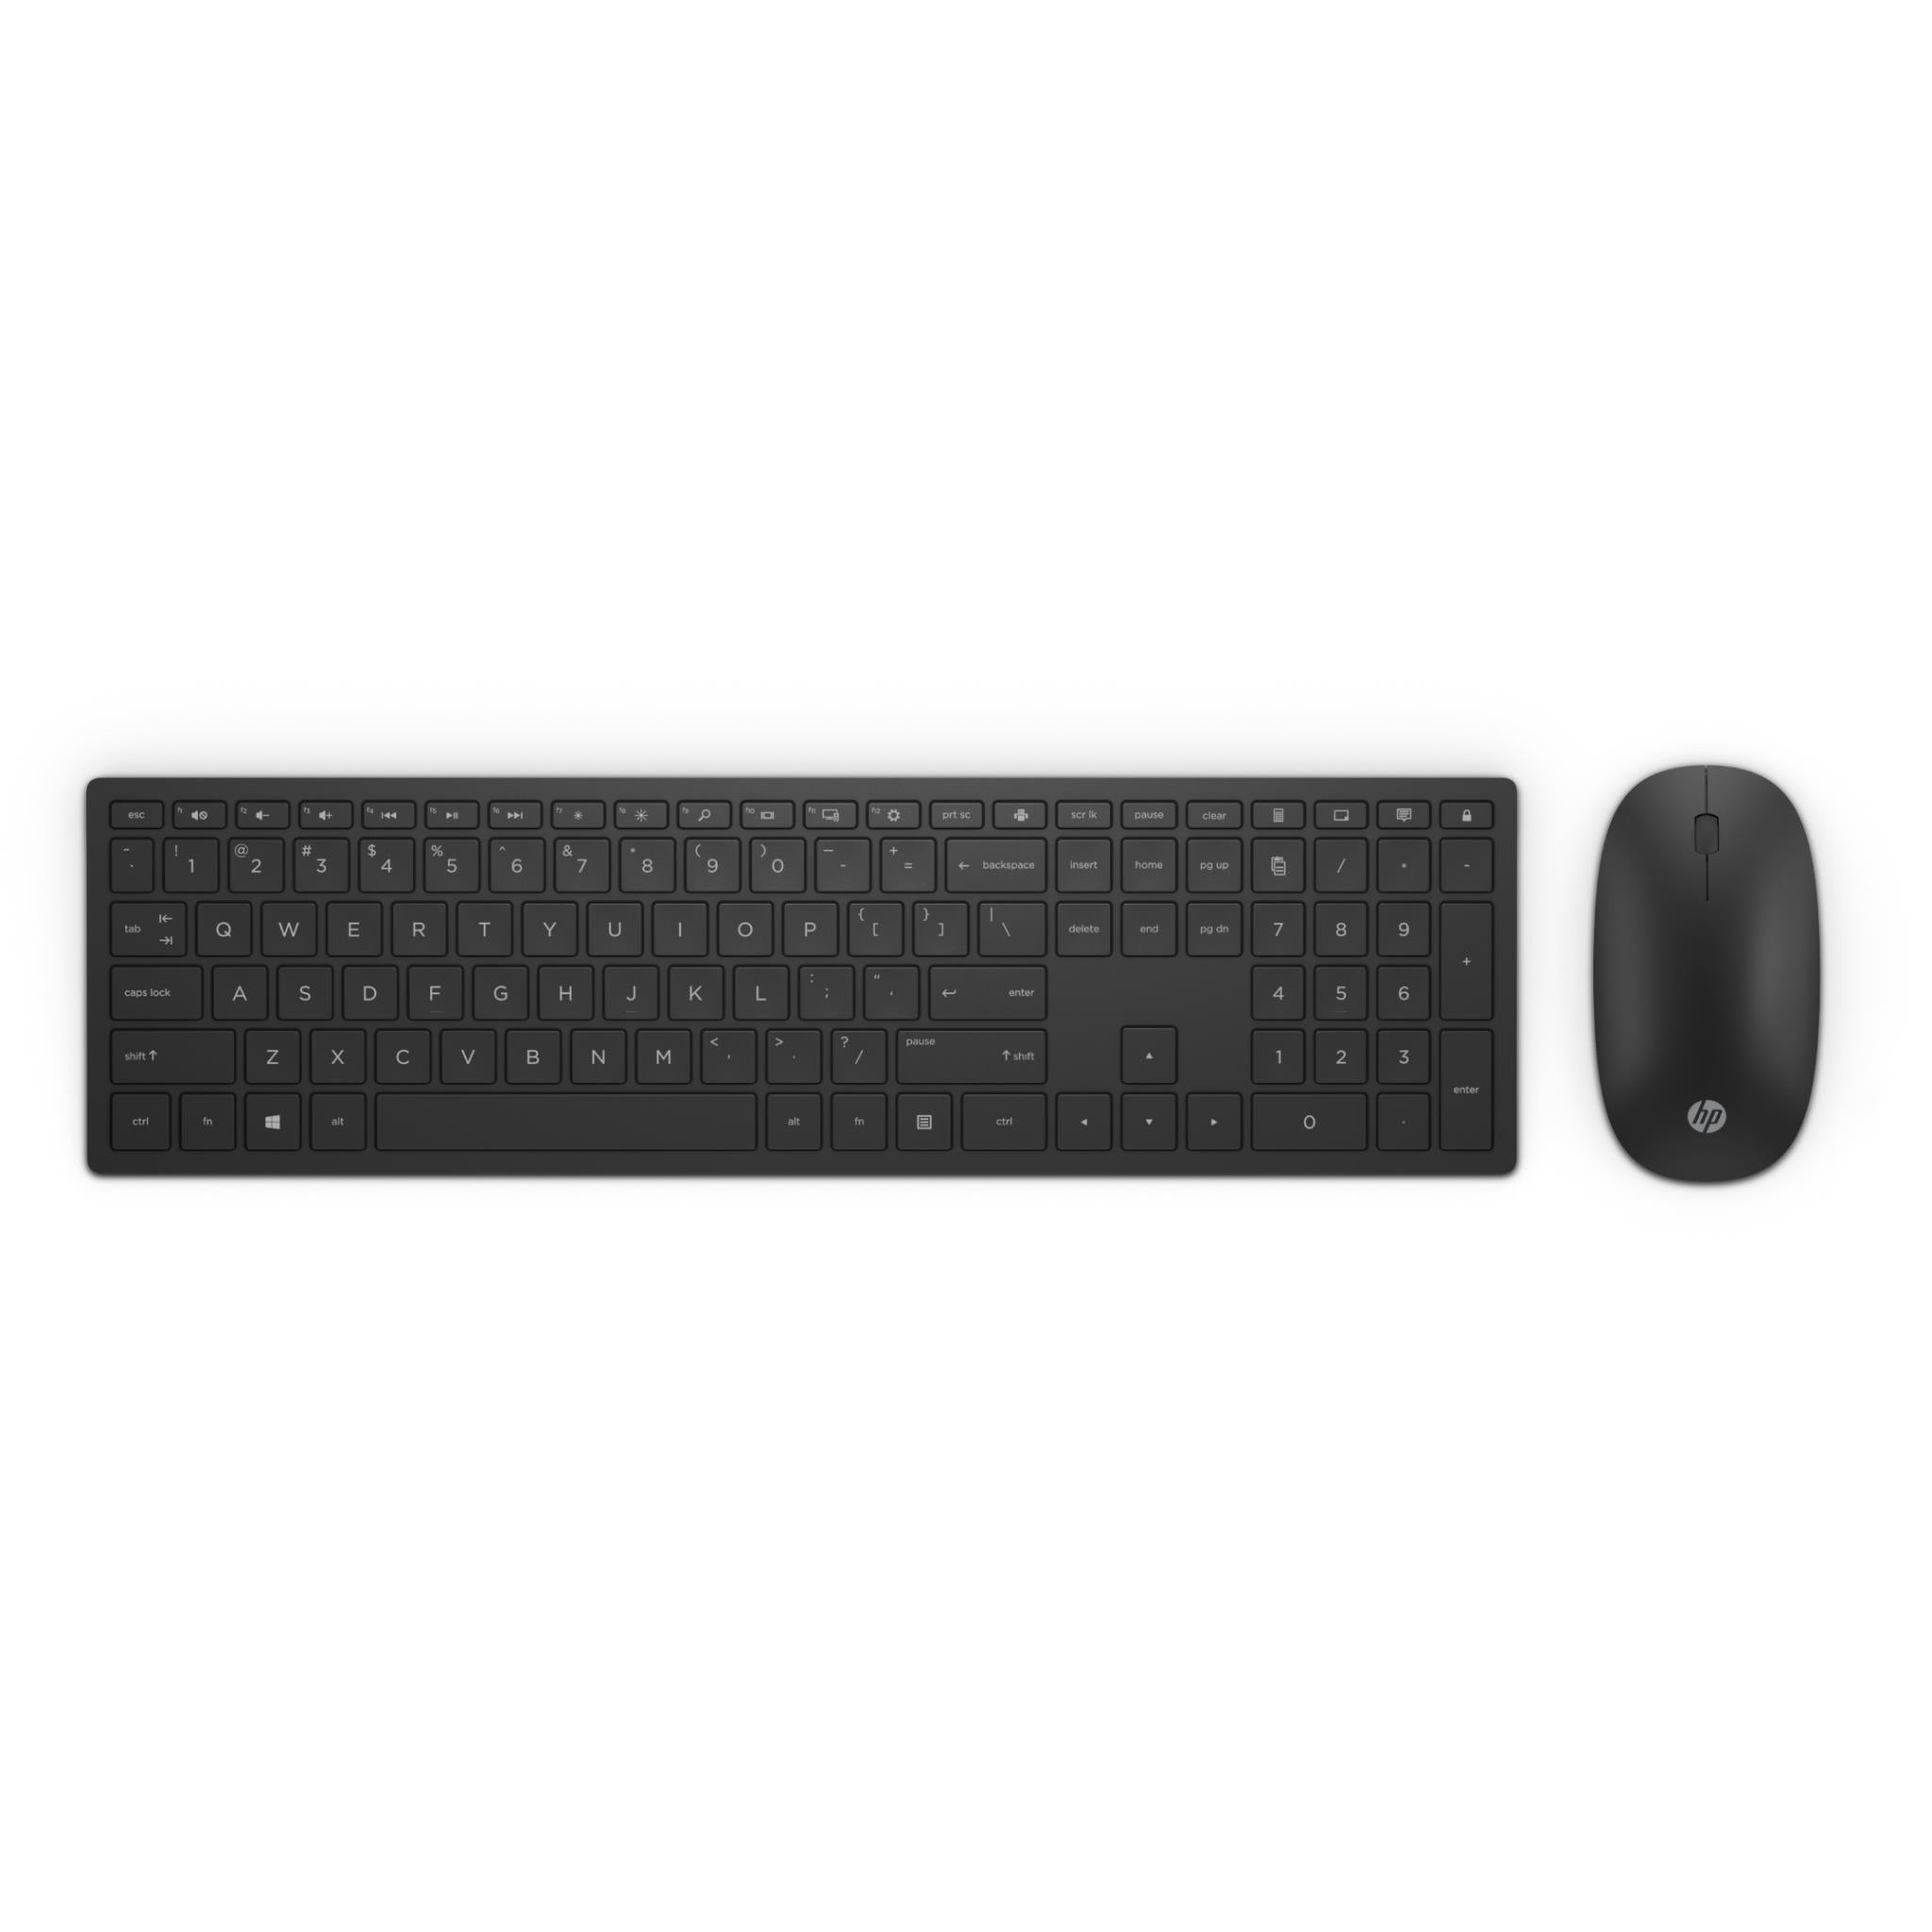 hp pavilion wireless keyboard and mouse 800 (black)